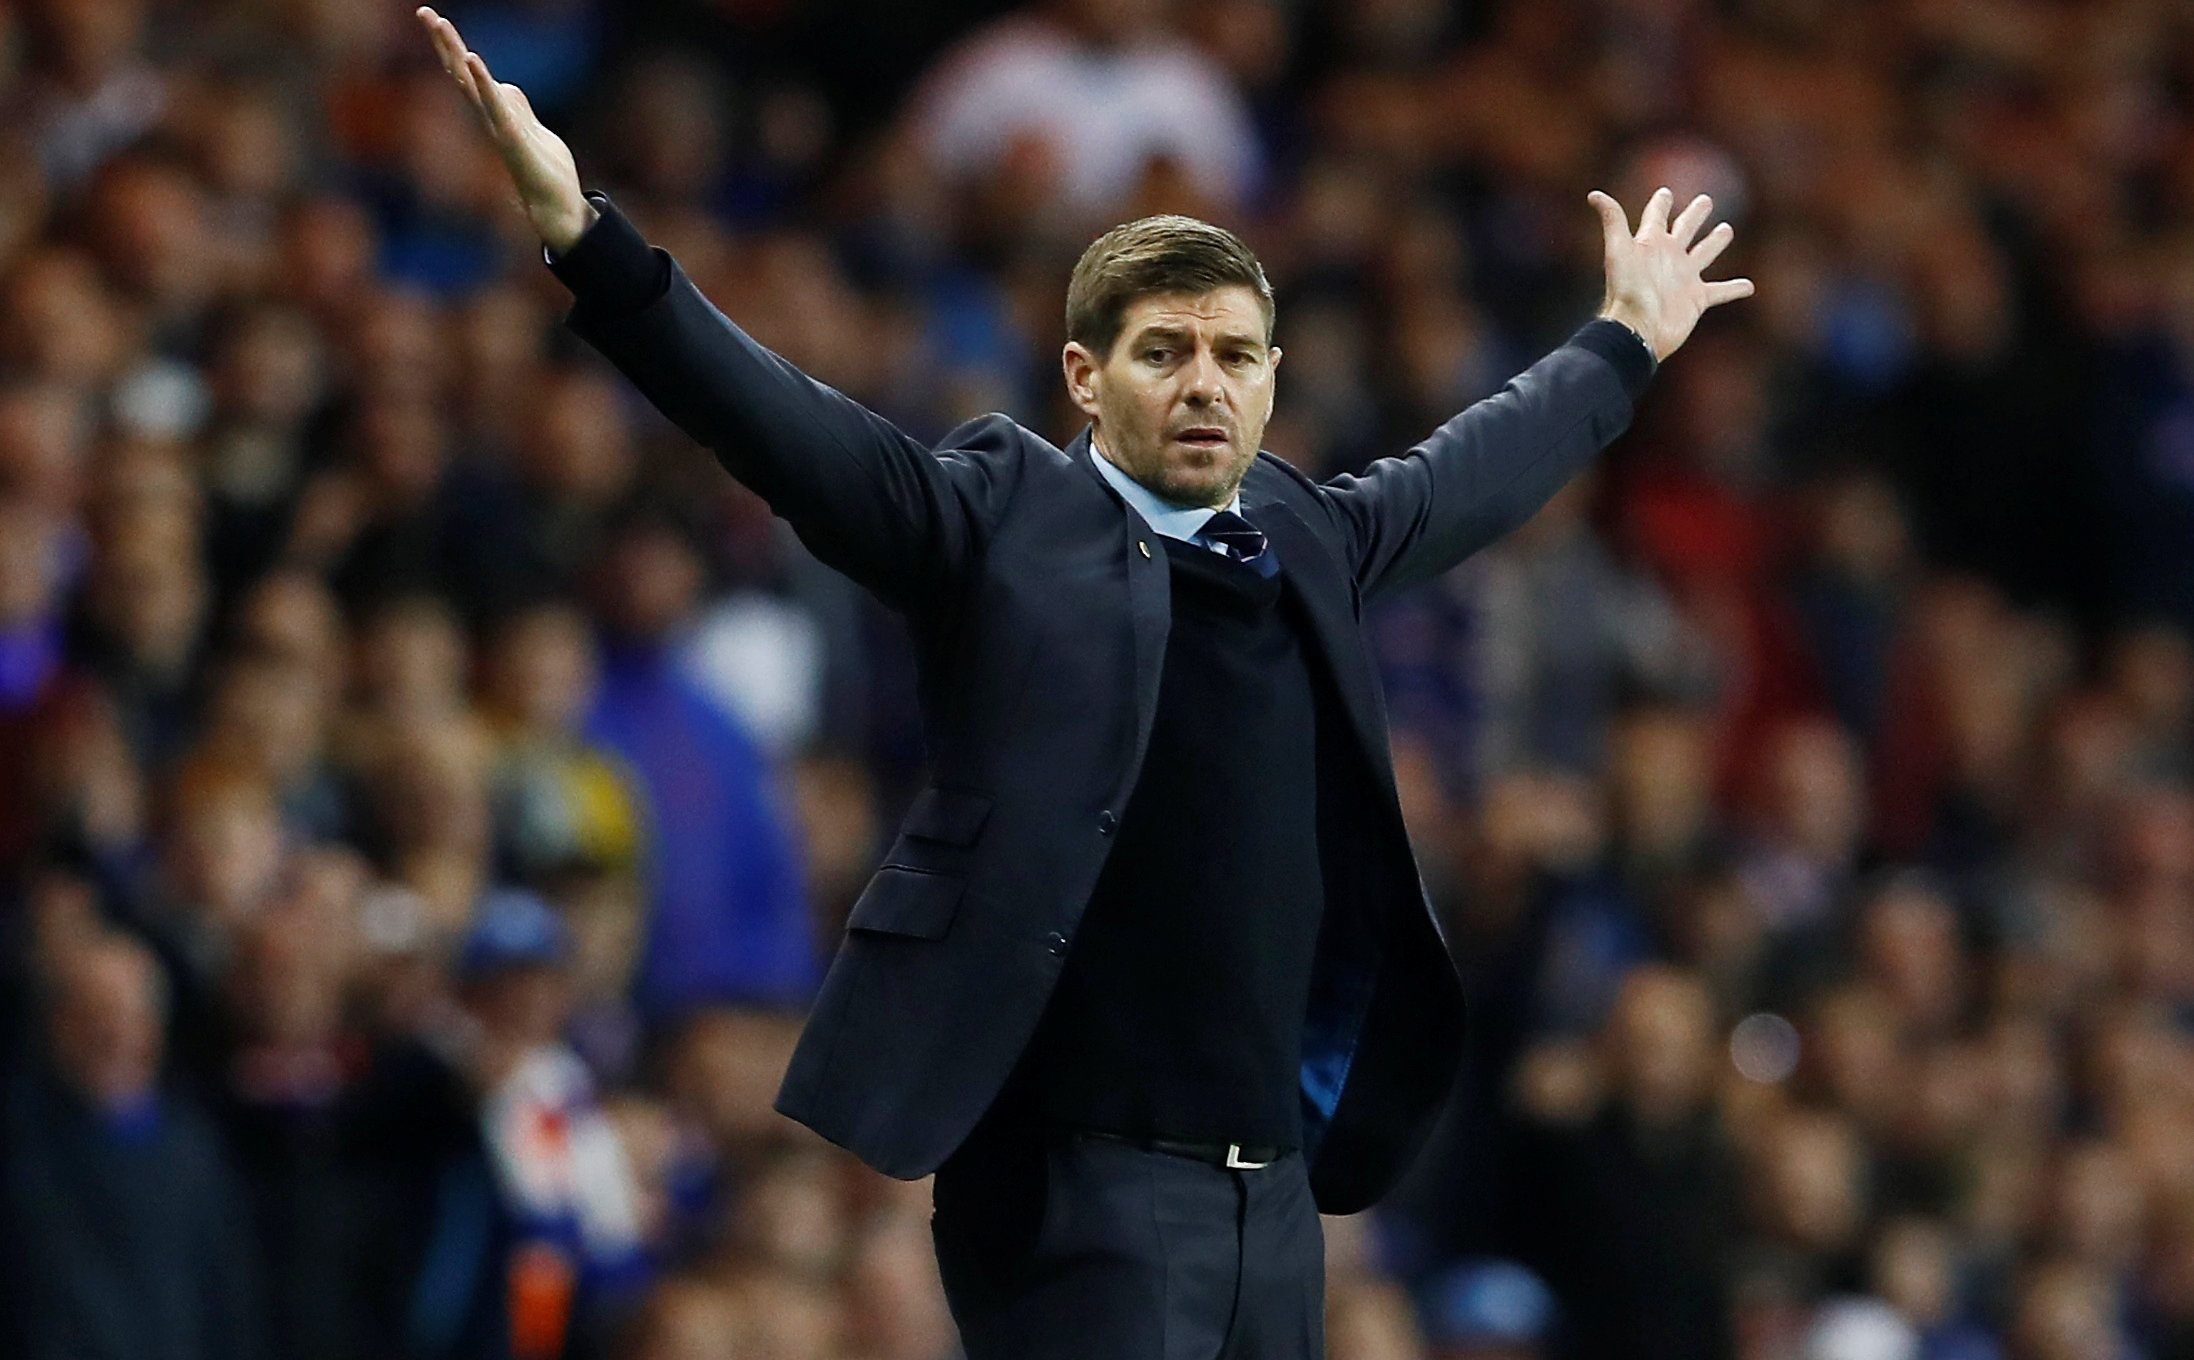 Soccer Football - Europa League - Group Stage - Group G - Rangers v SK Rapid Wien - Ibrox, Glasgow, Britain - October 4, 2018  Rangers manager Steven Gerrard reacts during the match        Action Images via Reuters/Jason Cairnduff